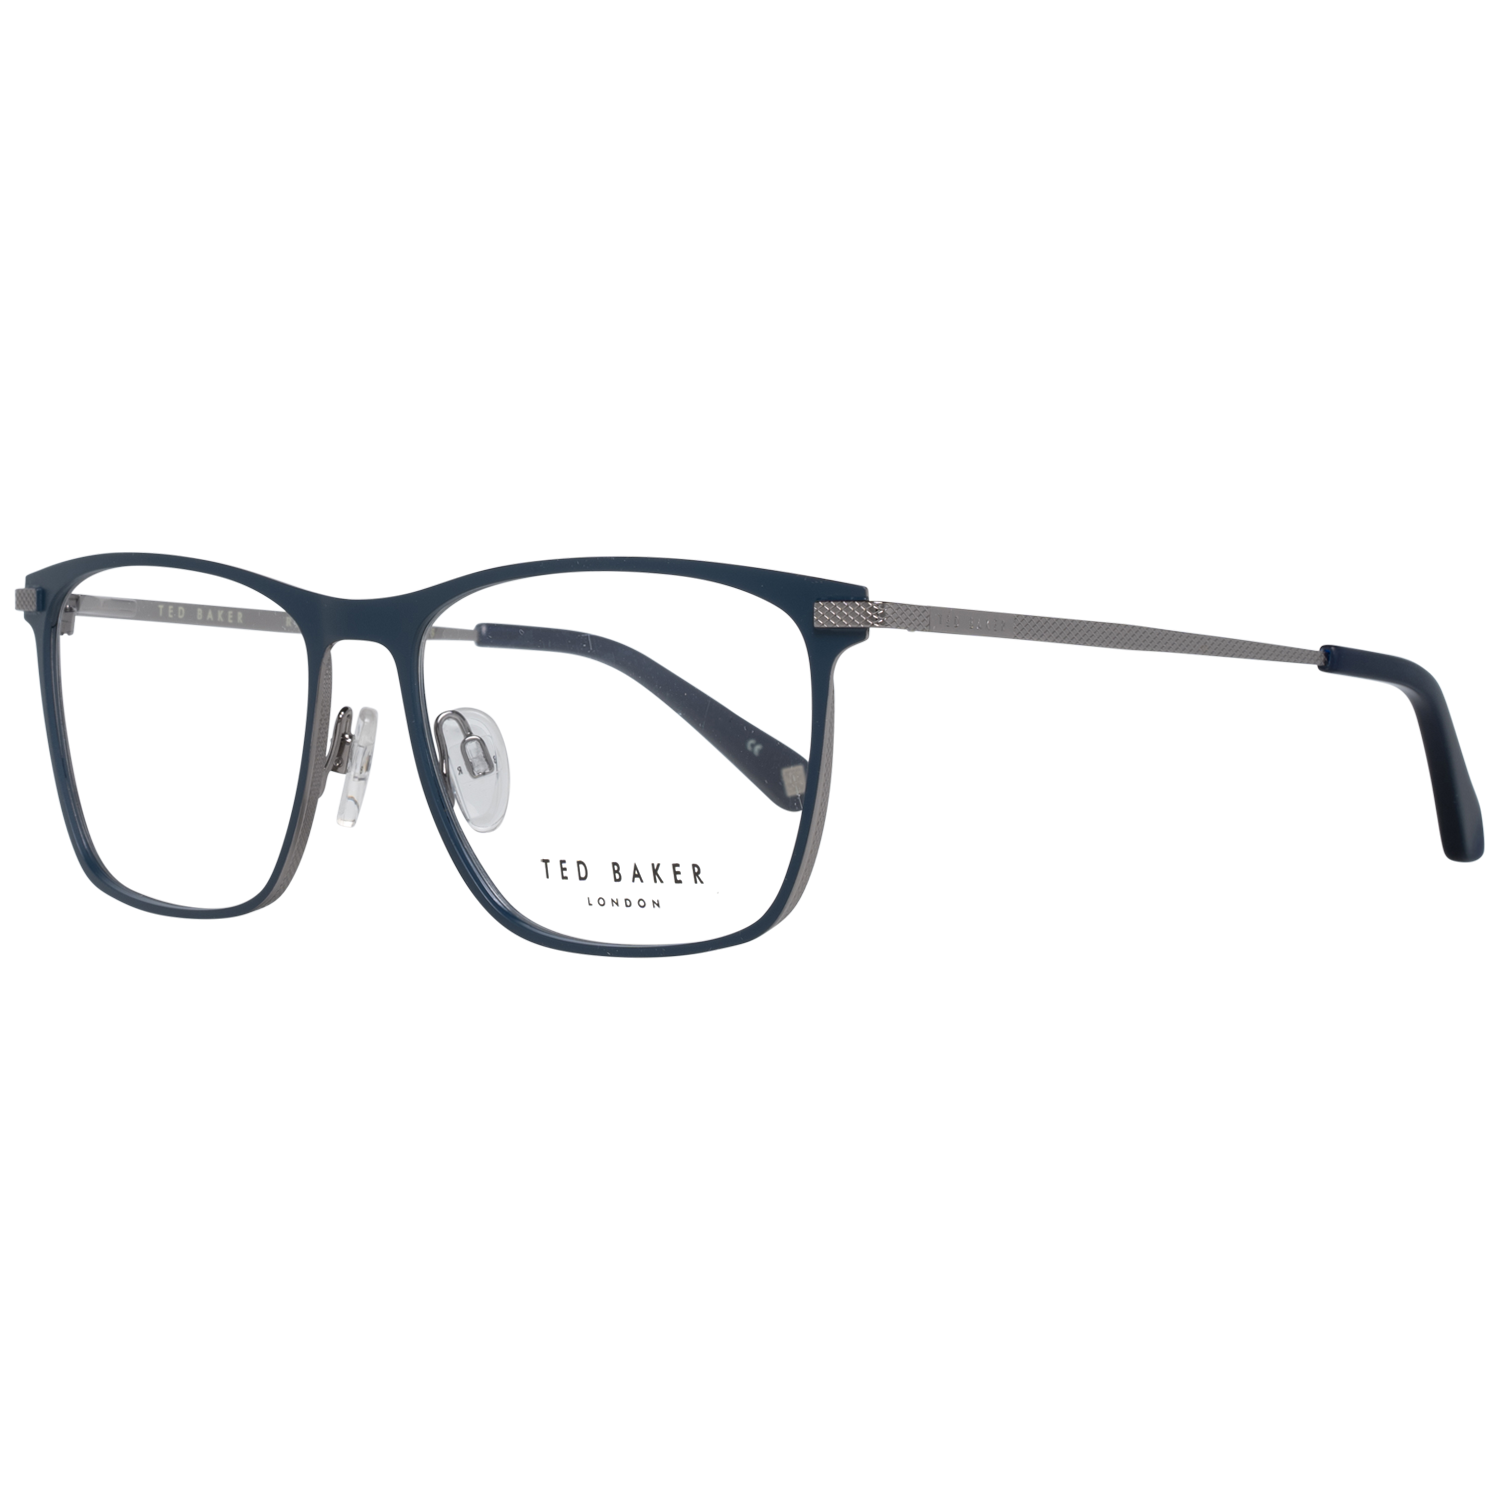 GenderMenMain colorBlueFrame colorBlueFrame materialMetalSize55-16-140Lenses width55mmLenses heigth40mmBridge length16mmFrame width143mmTemple length140mmShipment includesCase, Cleaning clothStyleFull-RimSpring hingeYes